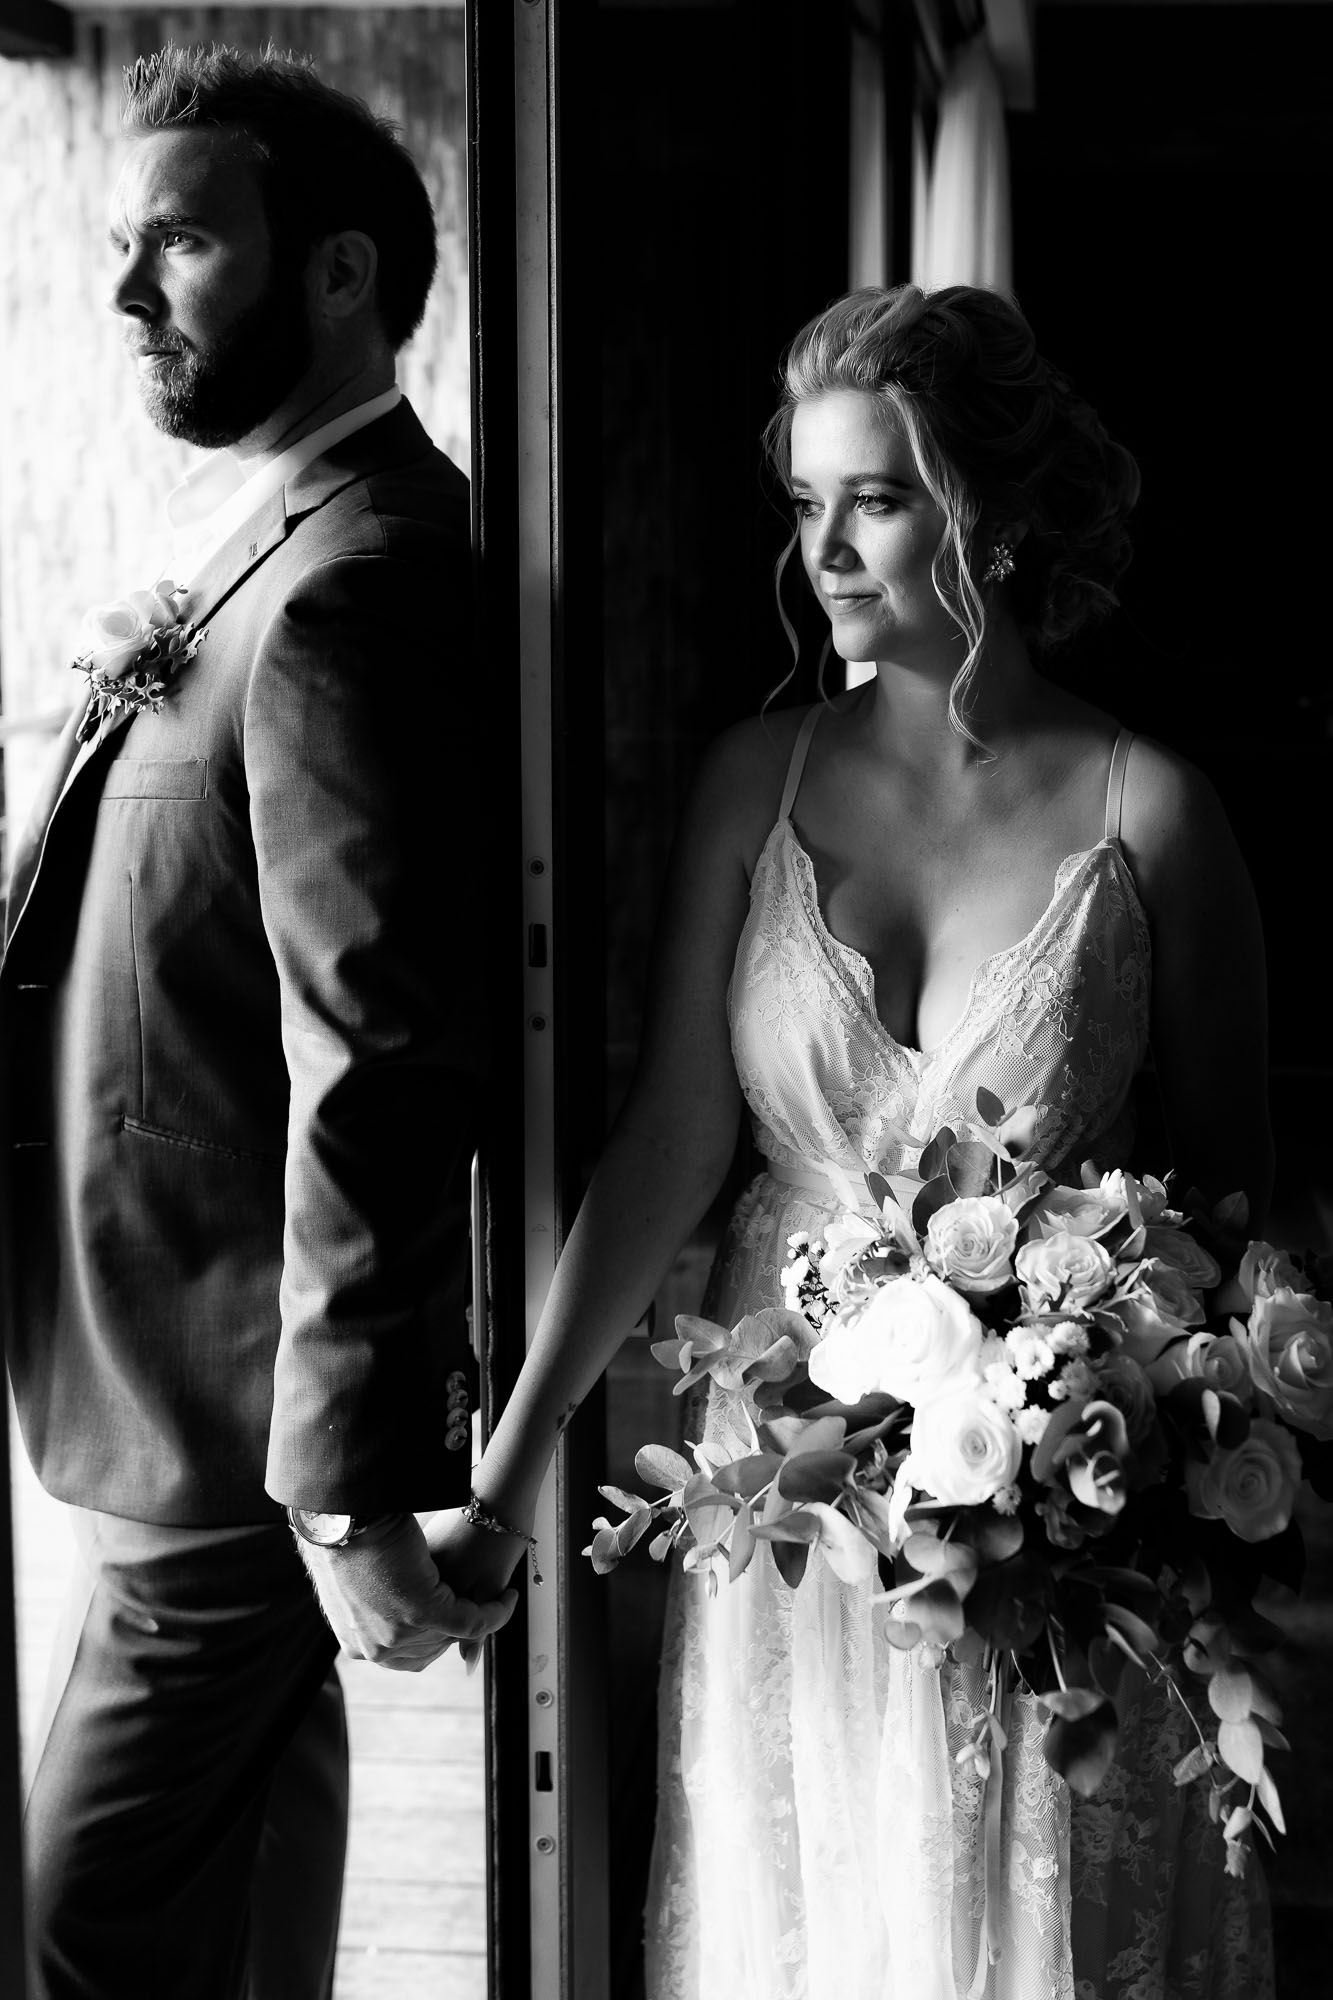 Poignant black and white capture of the bride and groom on either side of a door (they can't see each other yet)